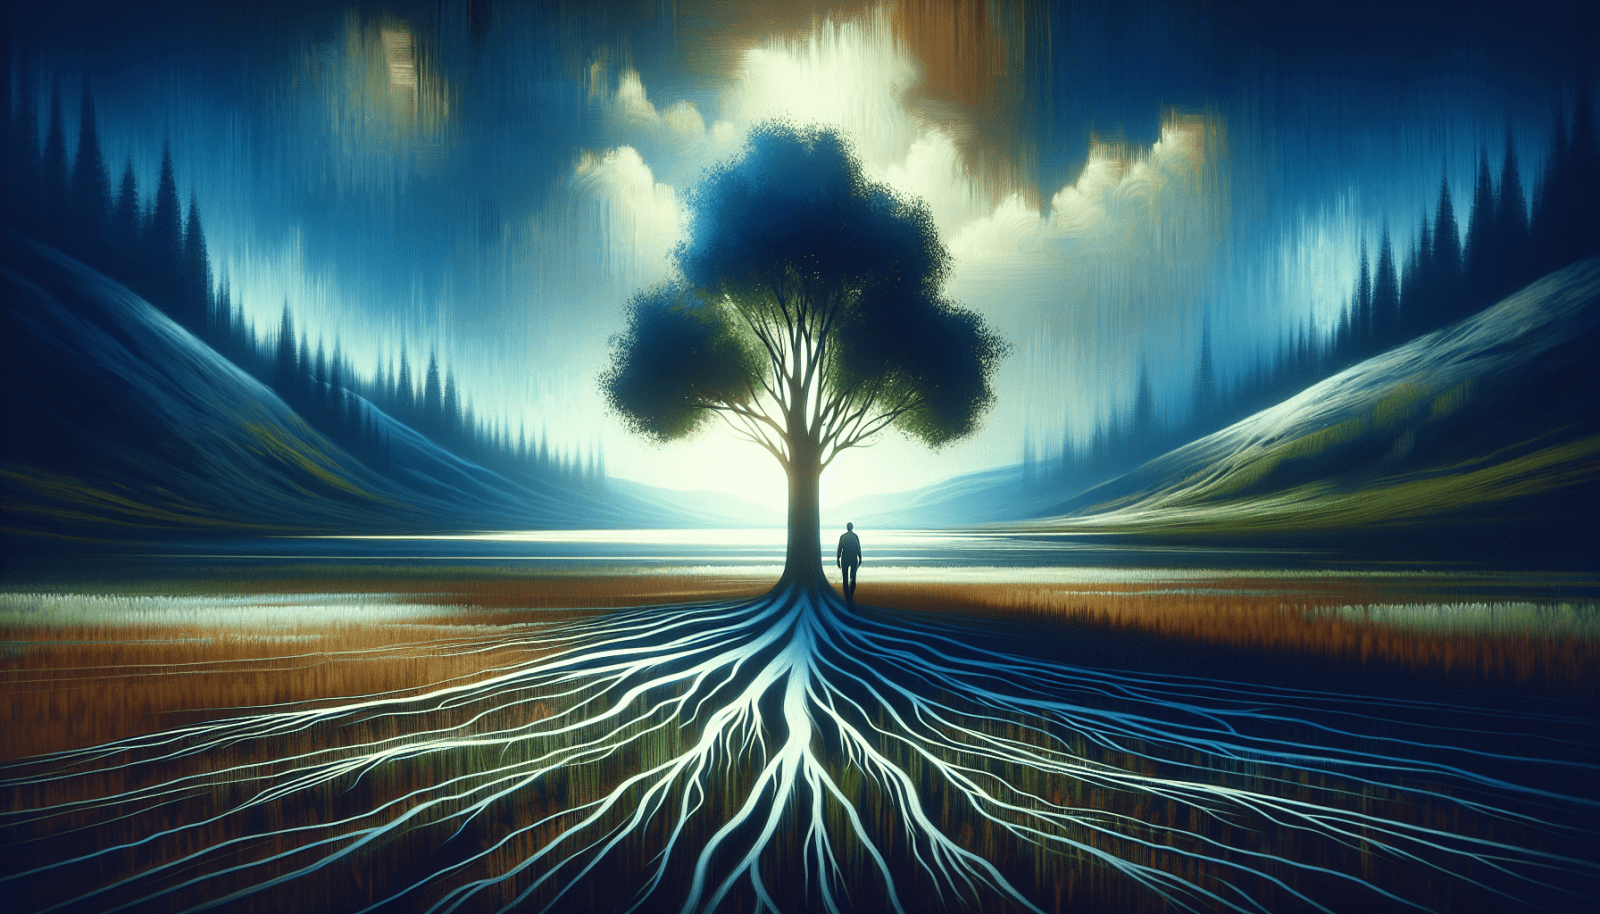 A solitary figure stands before a vibrant tree with extensive, glowing roots spreading across the landscape, amidst a dreamlike setting with exaggerated, brushstroke-like hills and a surreal, blue-toned sky.